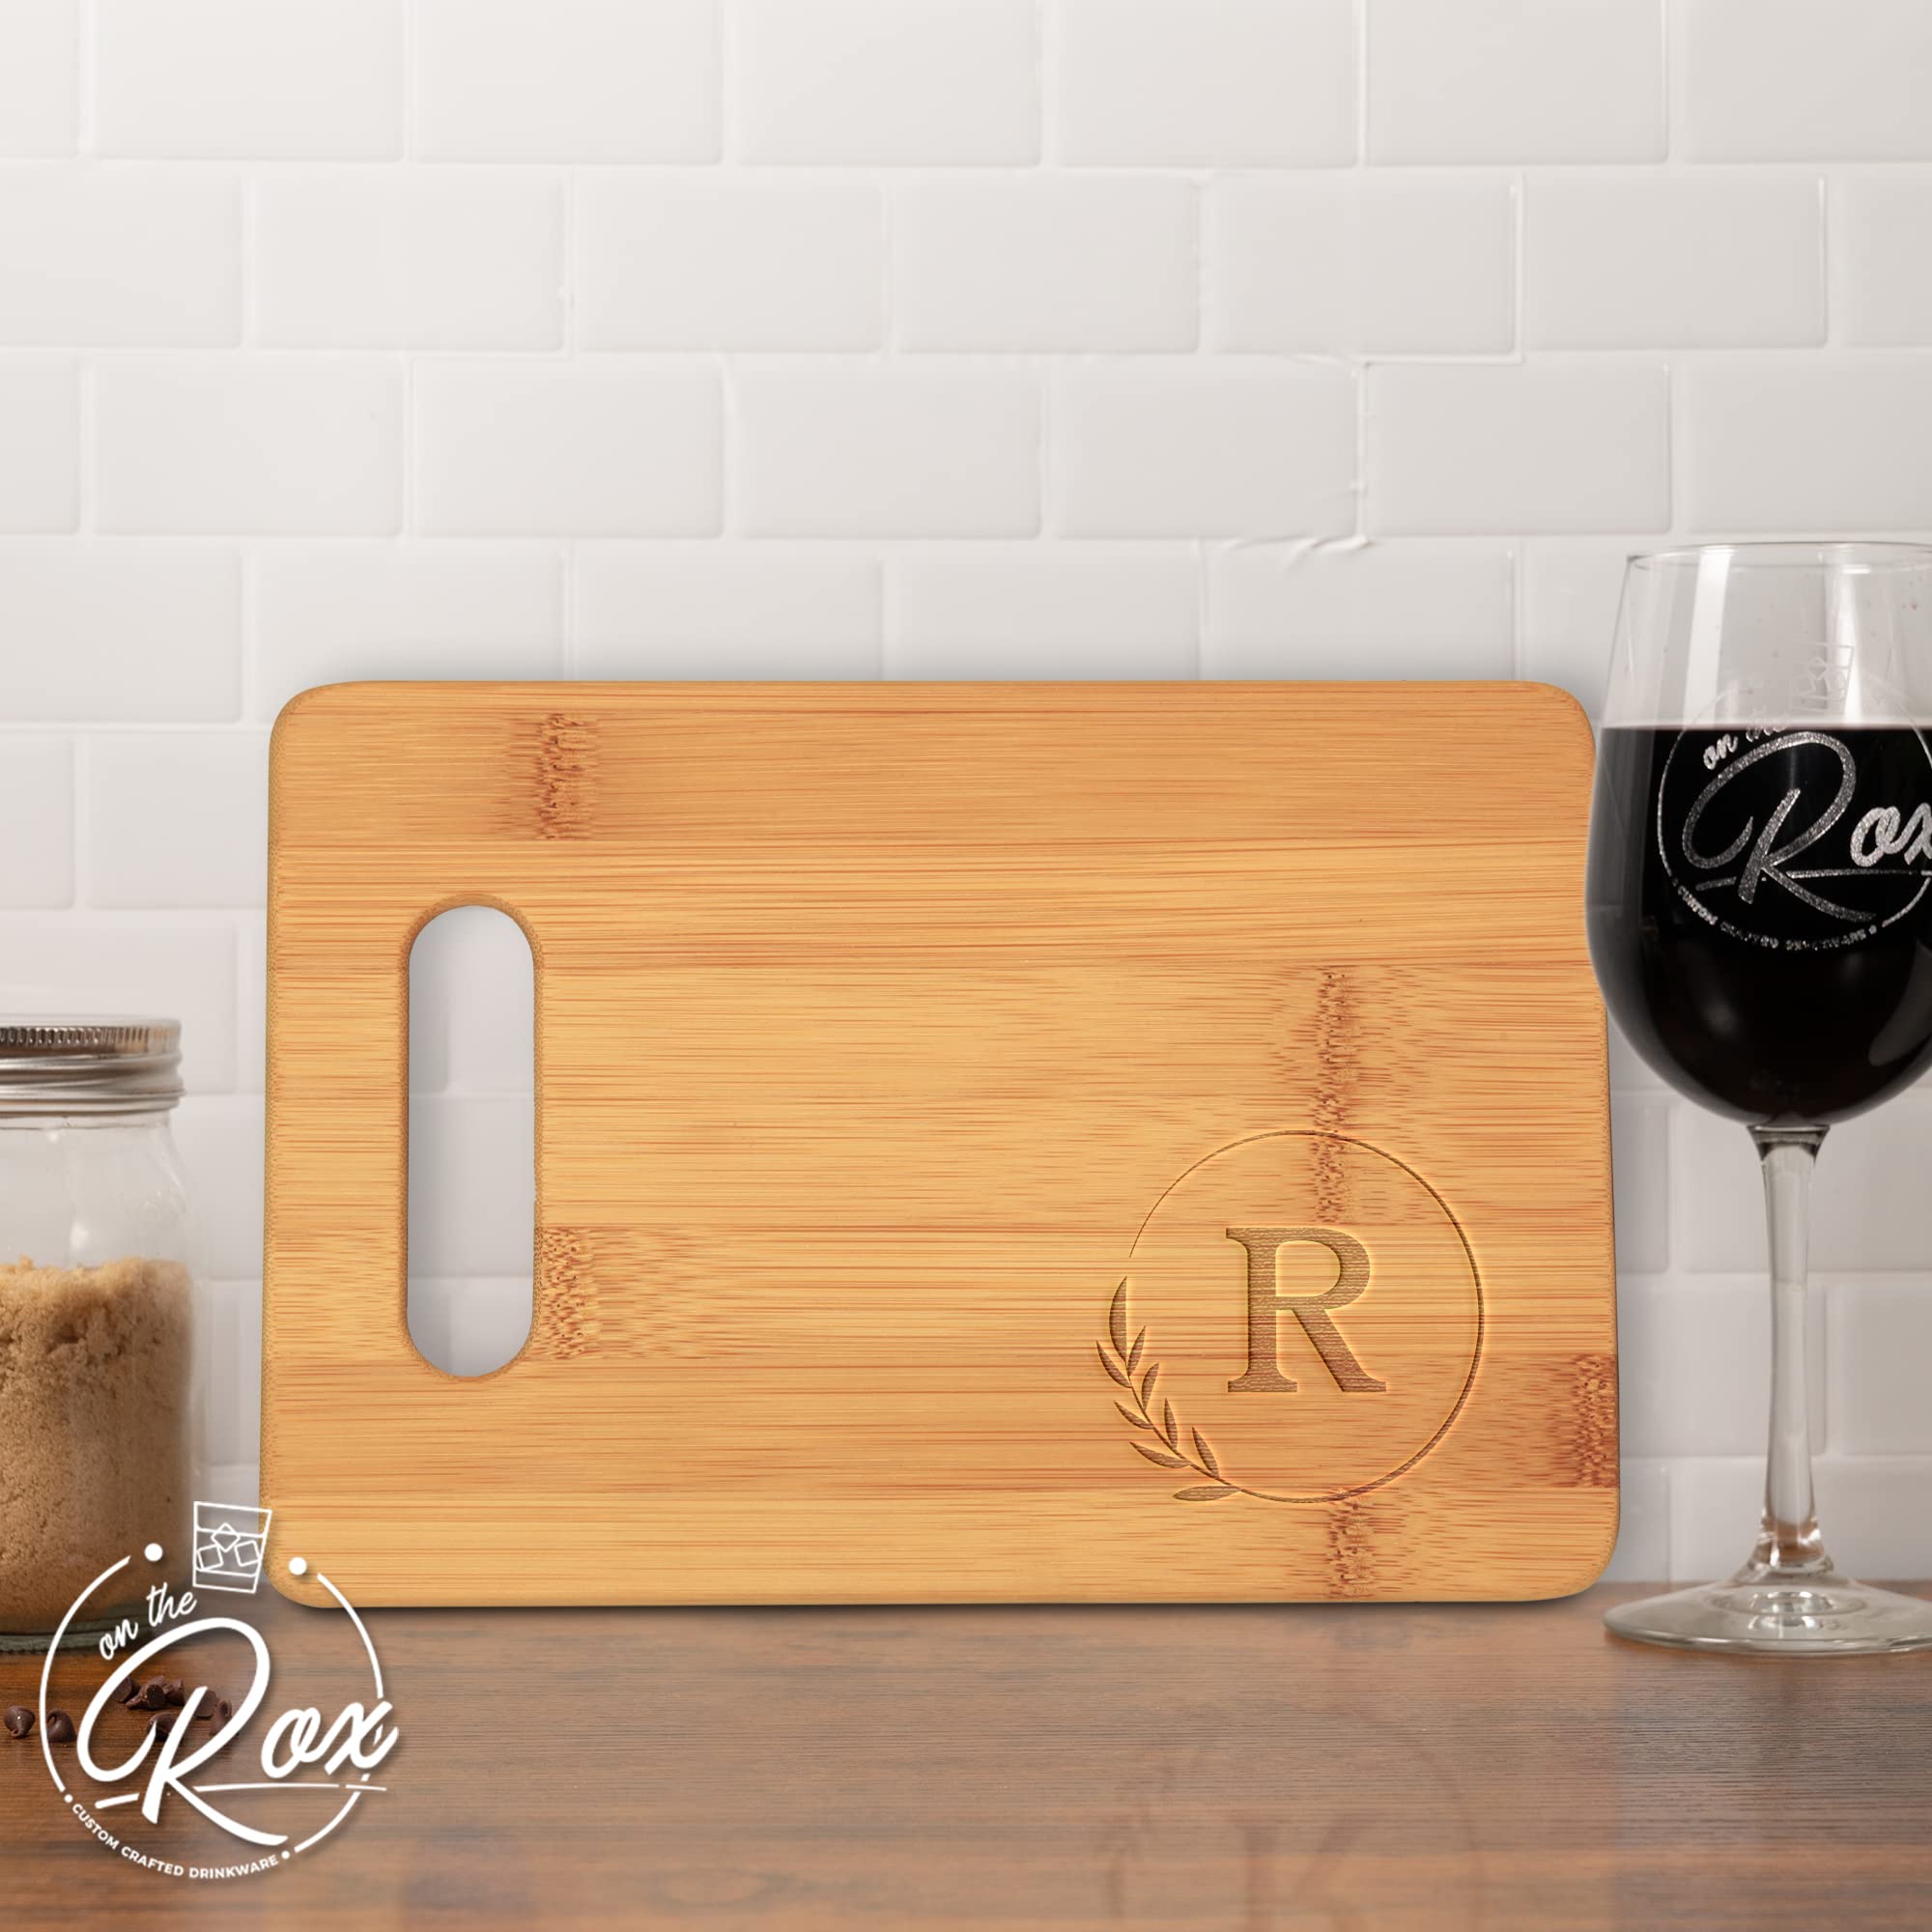 On The Rox Monogrammed Cutting Boards - 9” x 12” A to Z Personalized Engraved Bamboo Board (R) - Large Customized Wood Cutting Board with Initials - Wooden Custom Charcuterie Board Kitchen Gifts